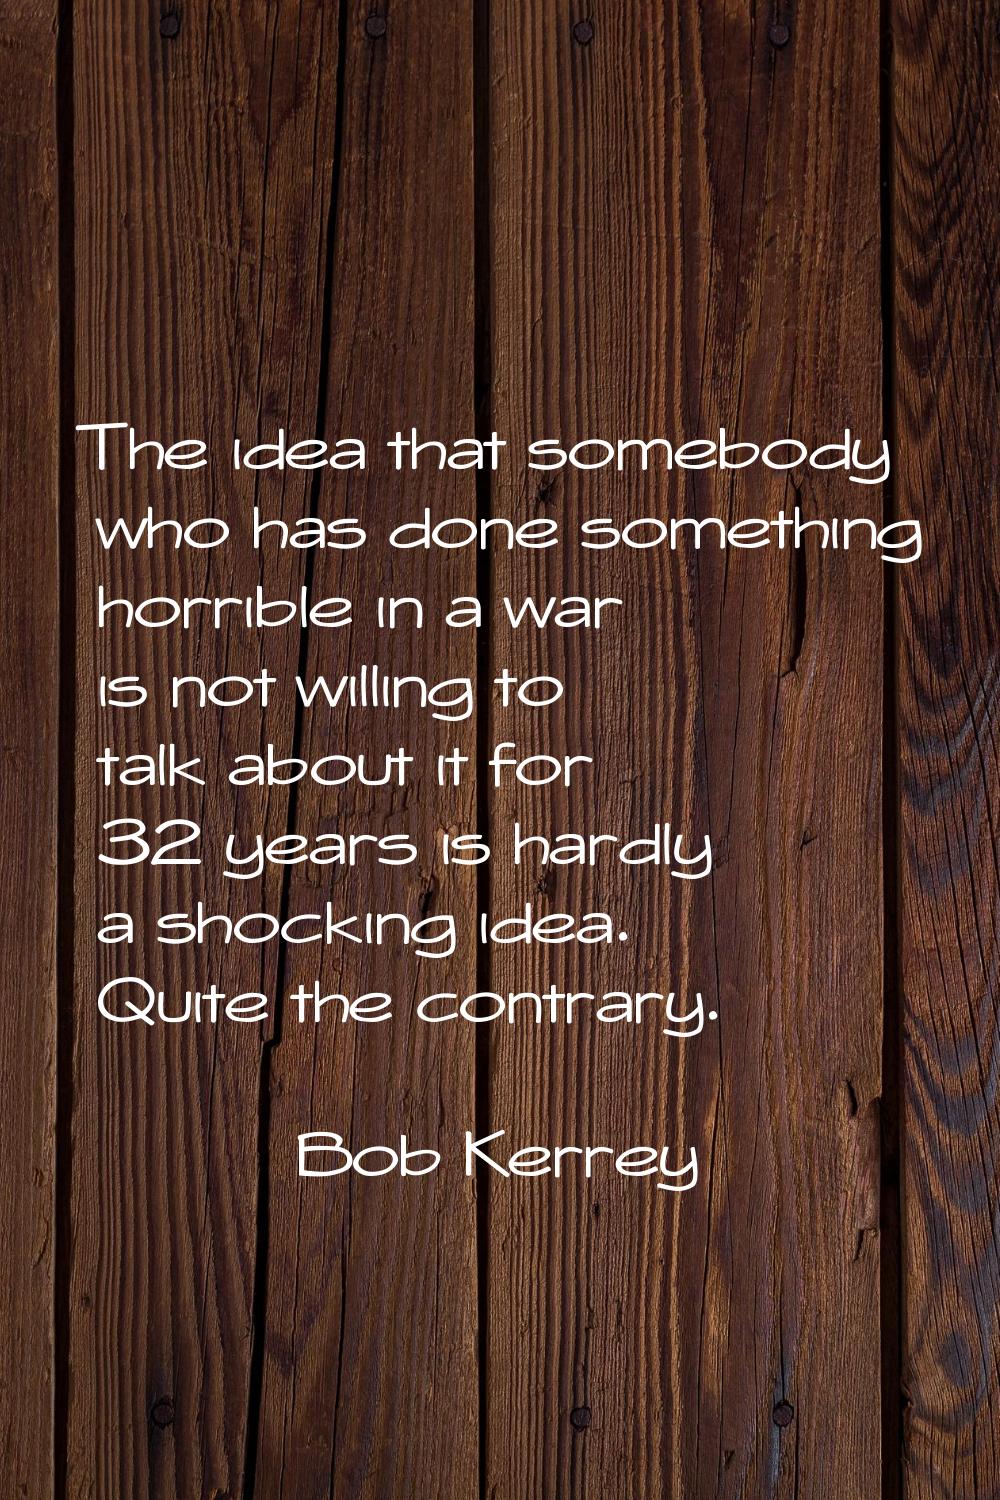 The idea that somebody who has done something horrible in a war is not willing to talk about it for